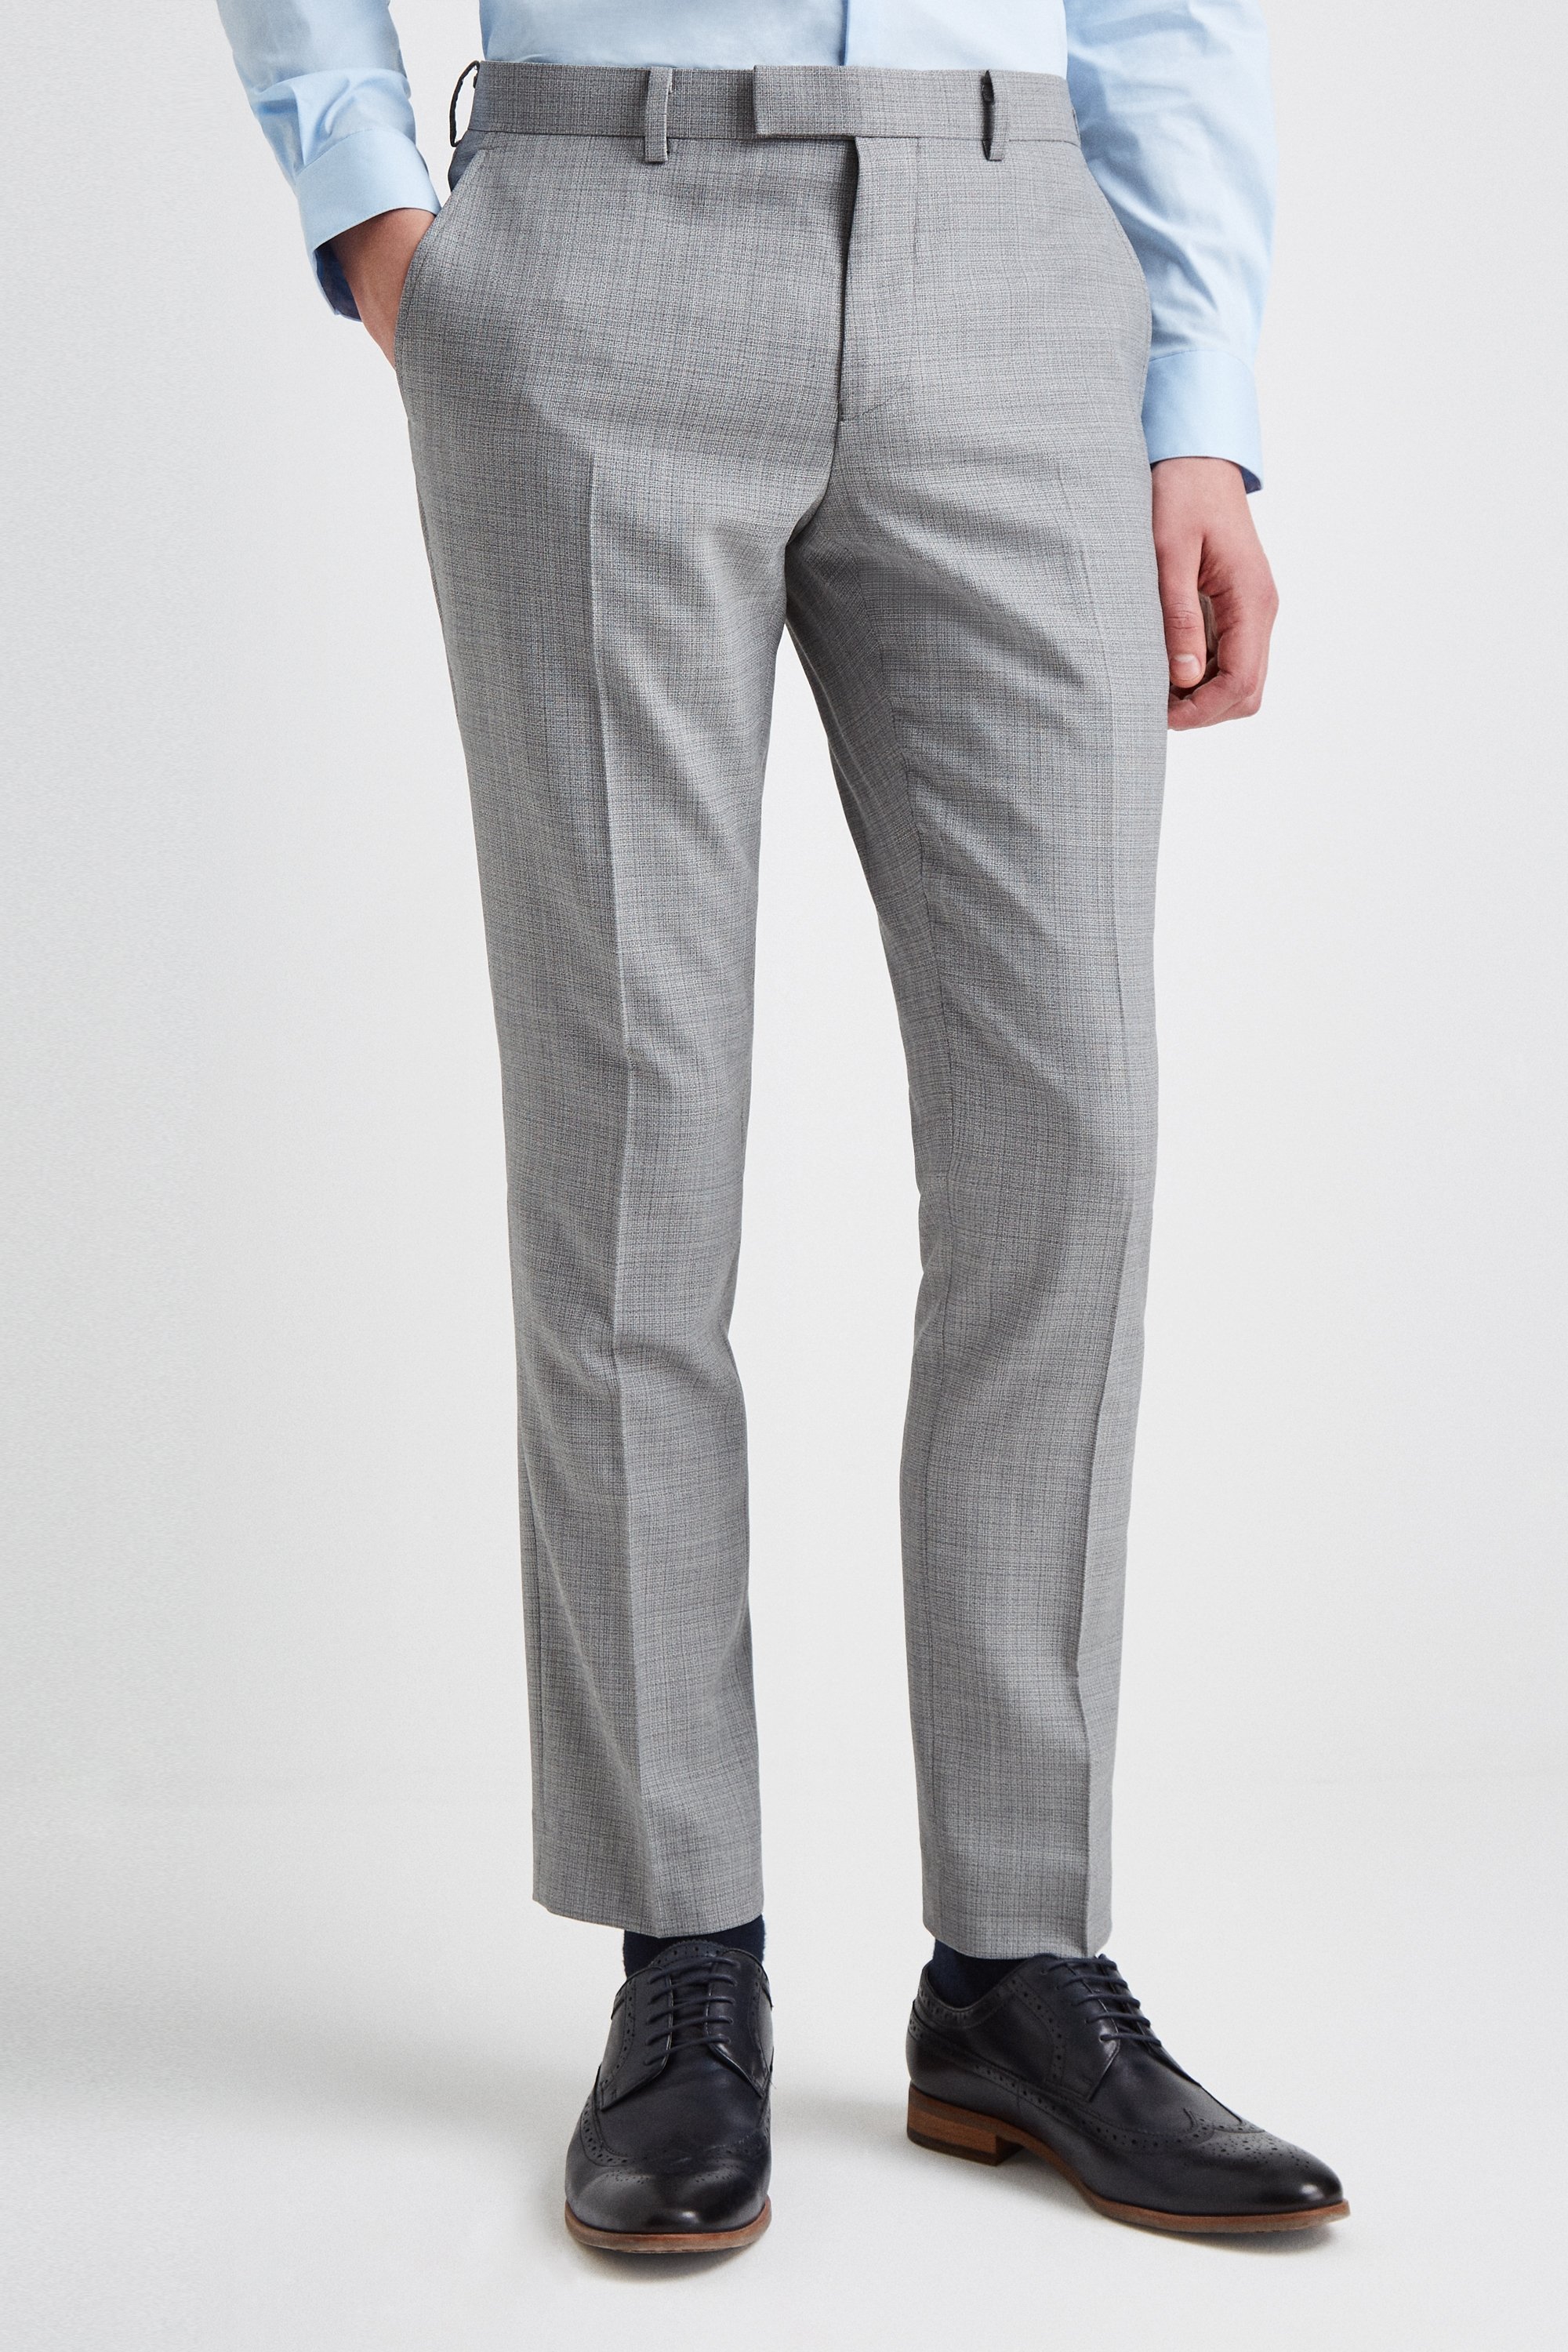 DKNY Slim Fit Light Grey Texture Trousers | Buy Online at Moss